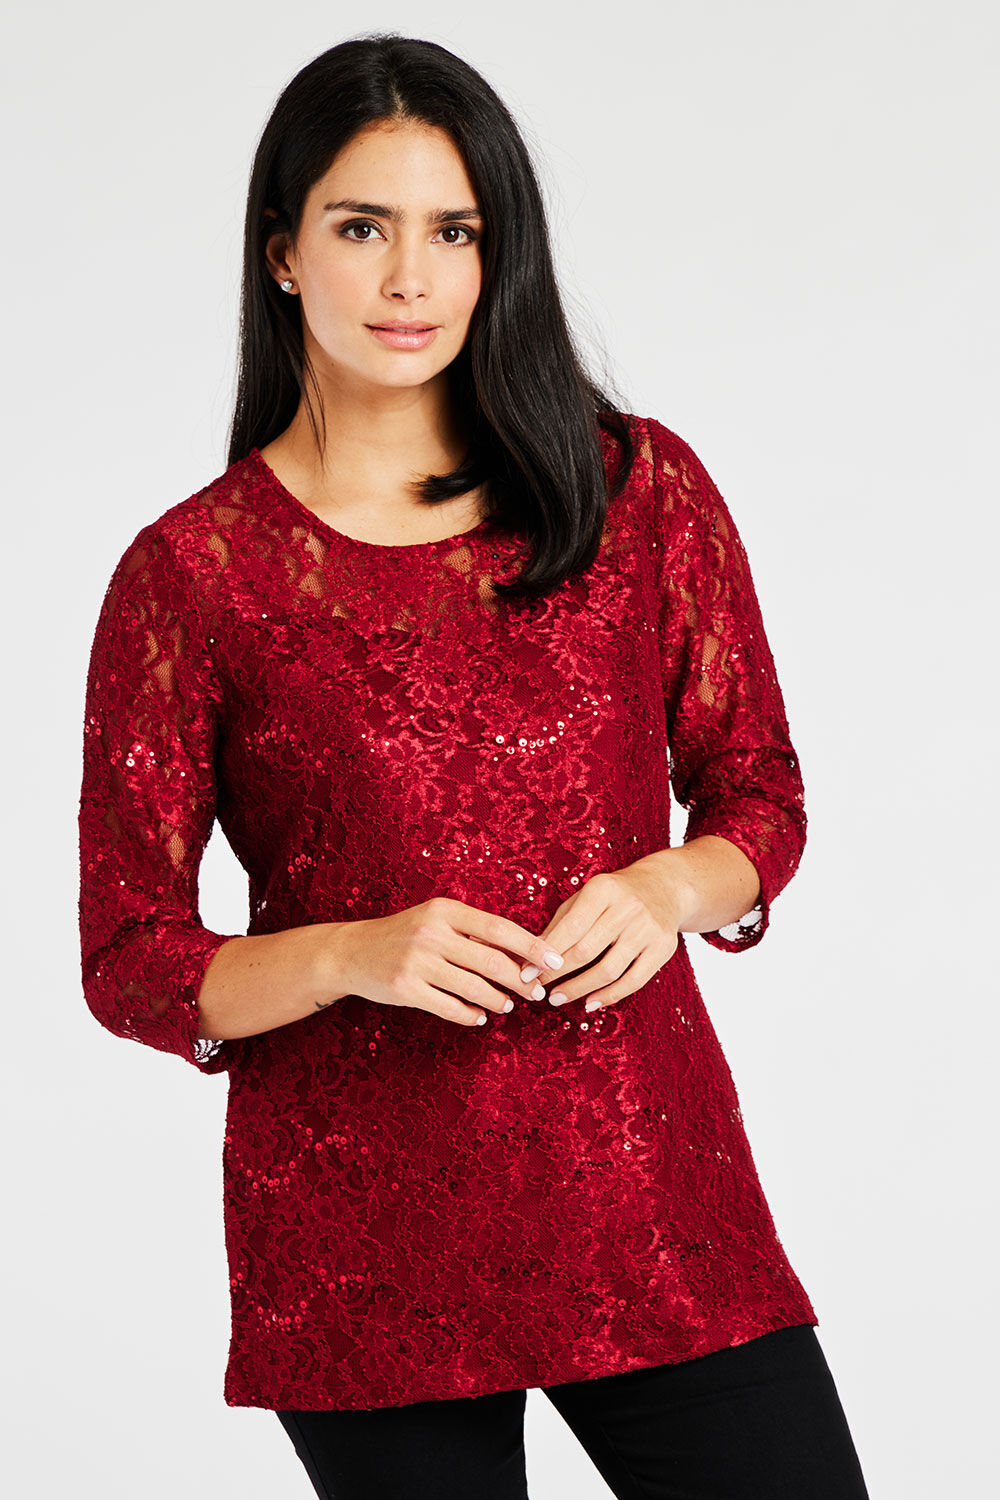 Bonmarche Burgundy 3/4 Sleeve Sequin and Lace Tunic, Size: 10